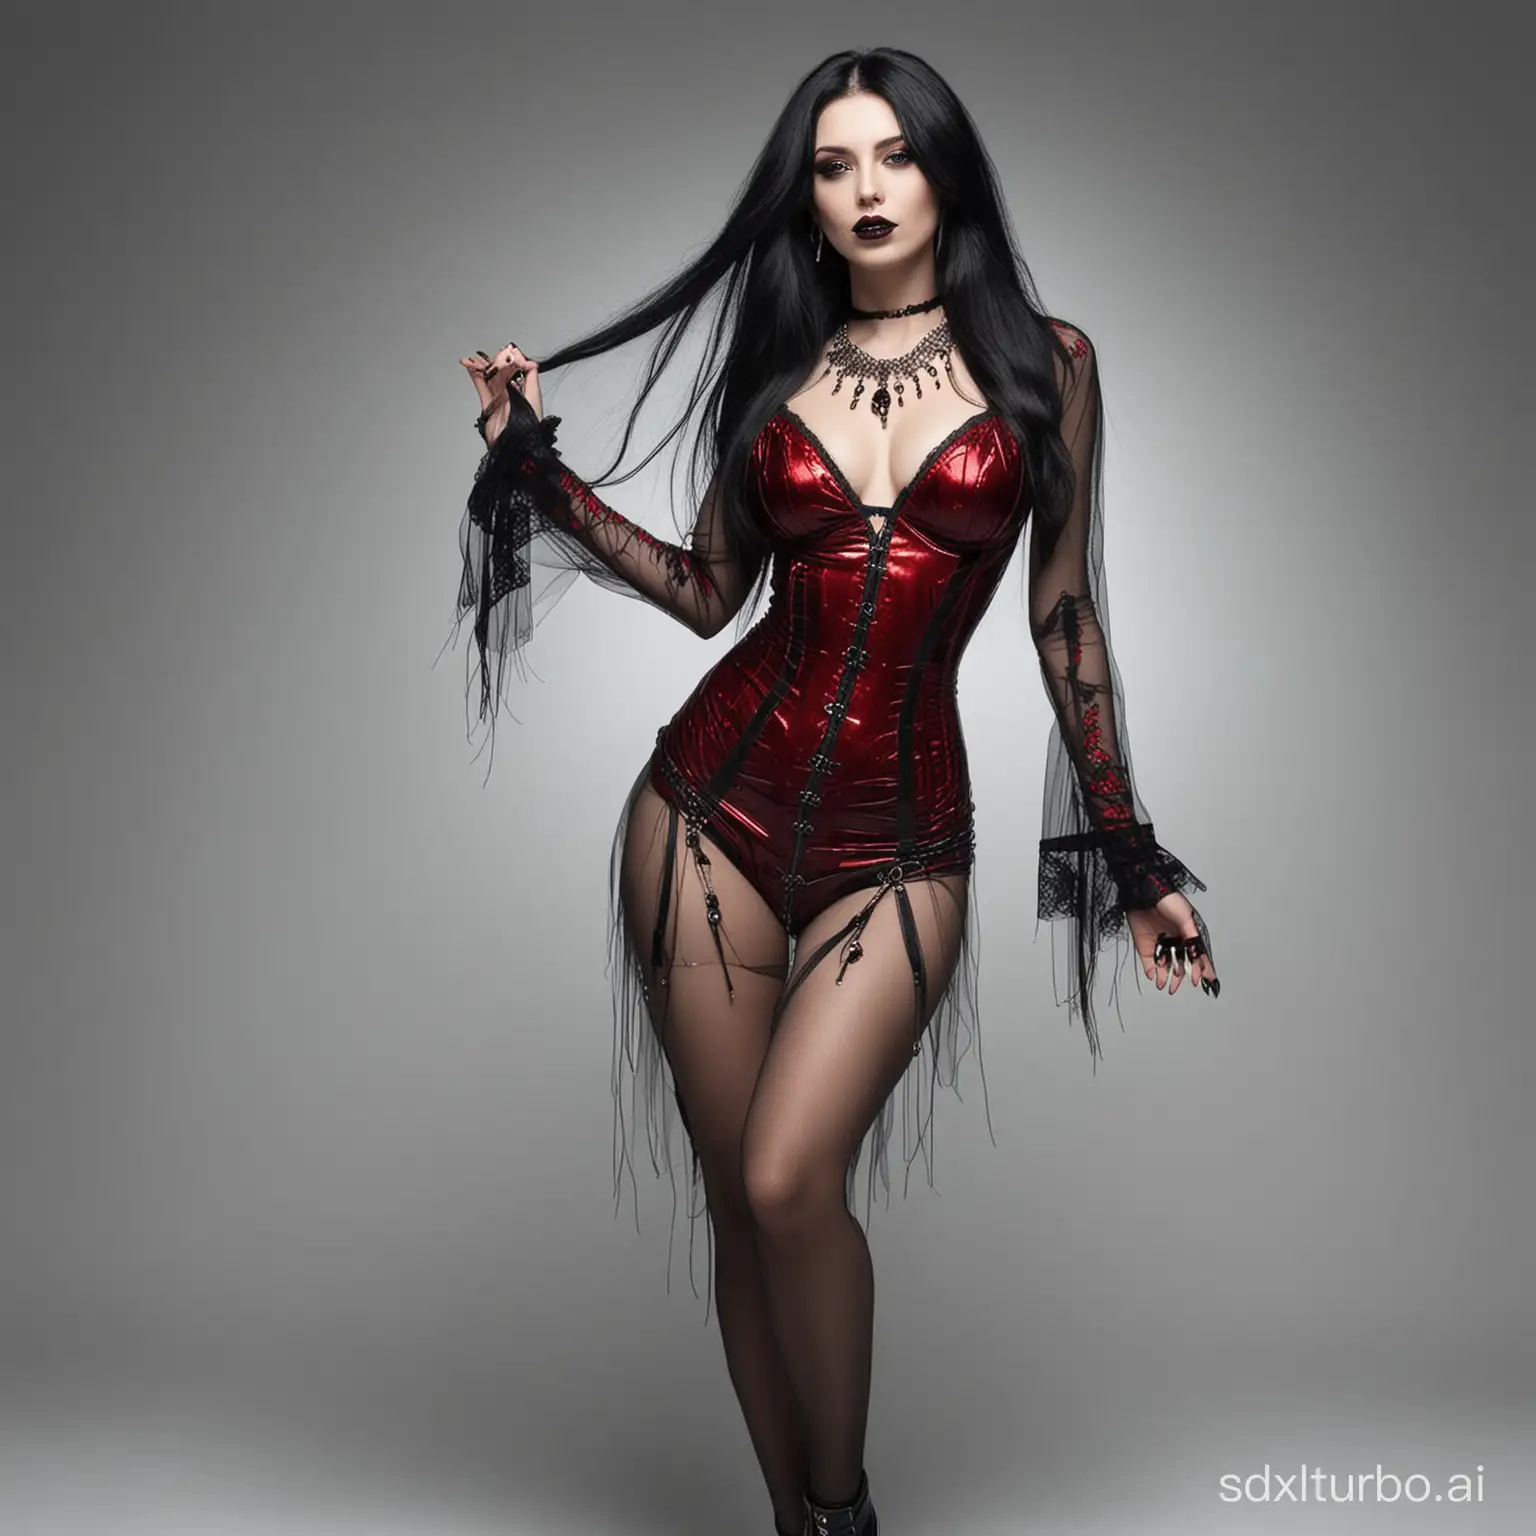 Seductive-Gothic-Woman-in-Dark-Red-Lingerie-with-Silver-Jewelry-and-Black-Lipstick